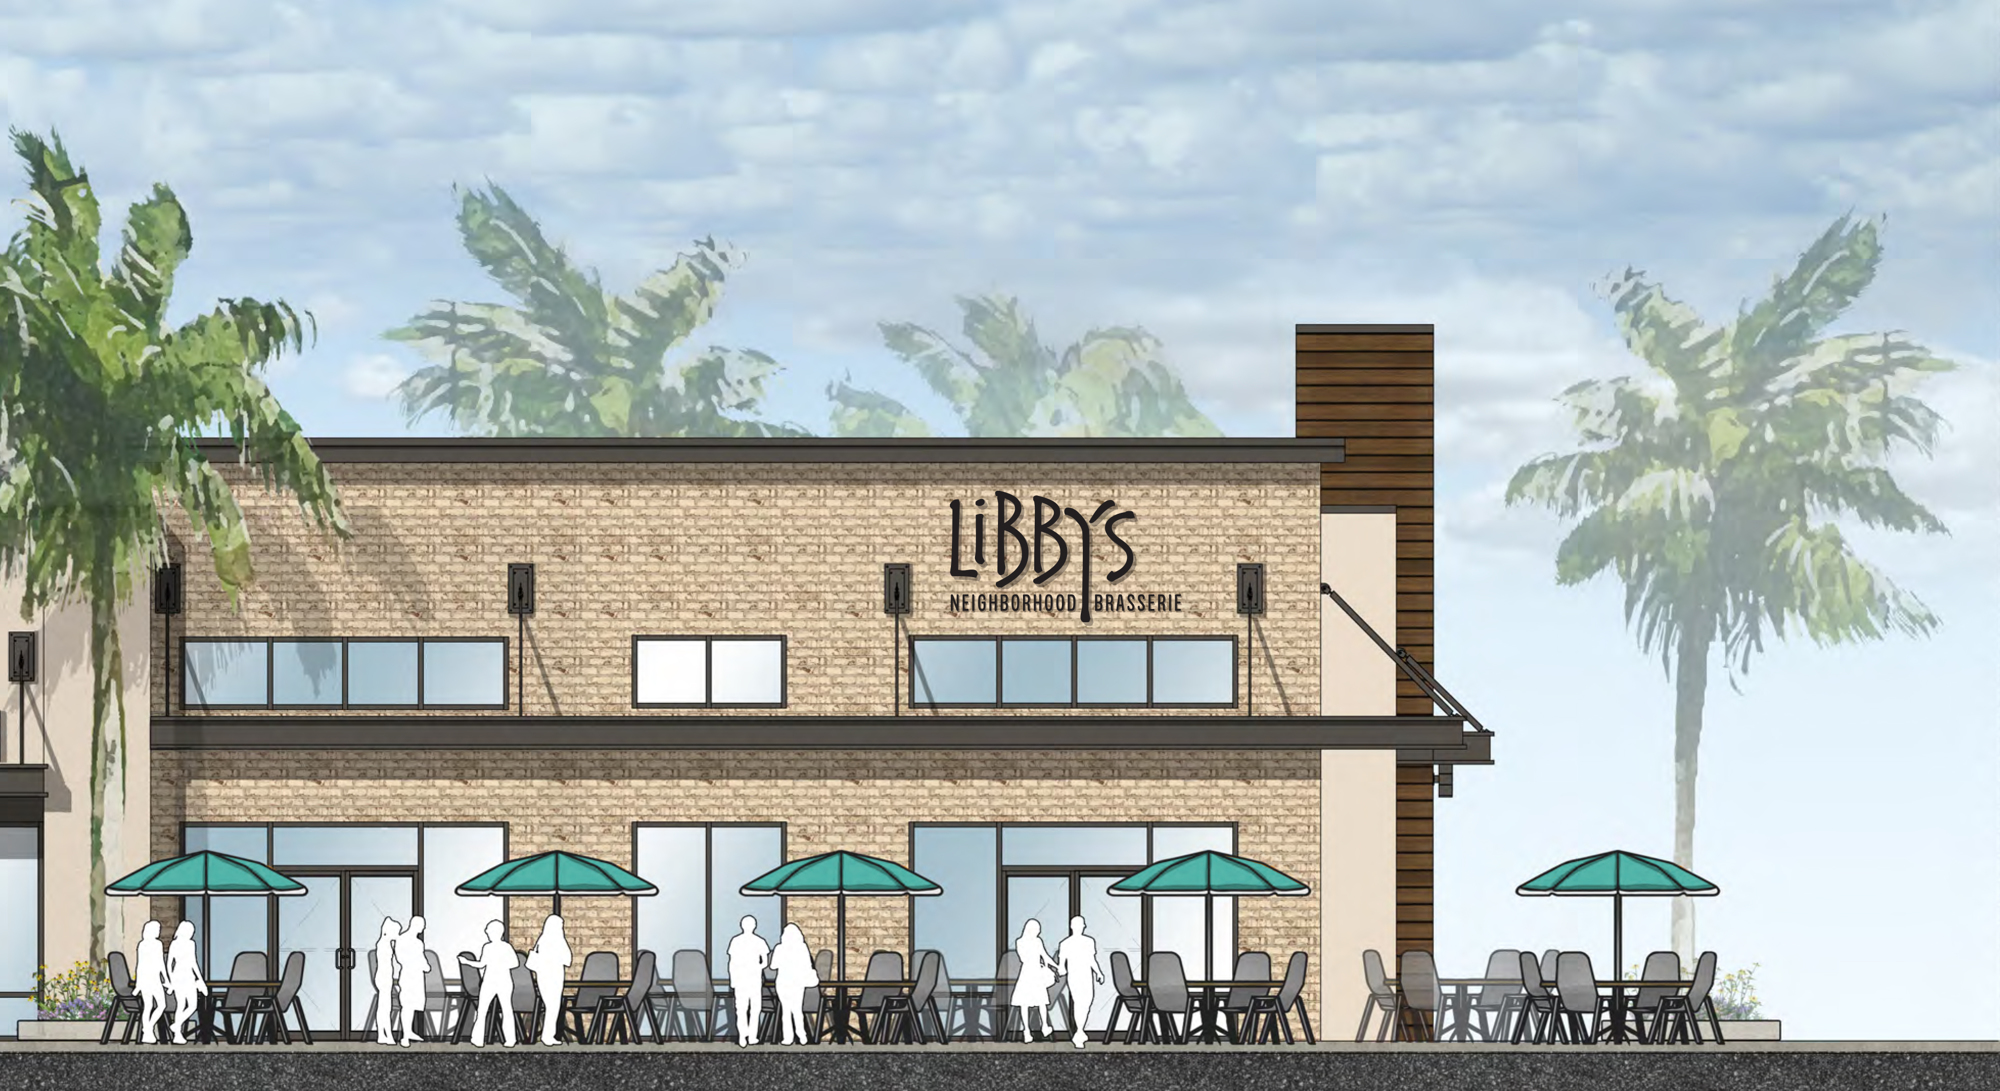 Tableseide Restaurant Group unveiled the look for the Lakewood Ranch location of Libby’s Neighborhood Brasserie on the corner of Lorraine Road and University Parkway.